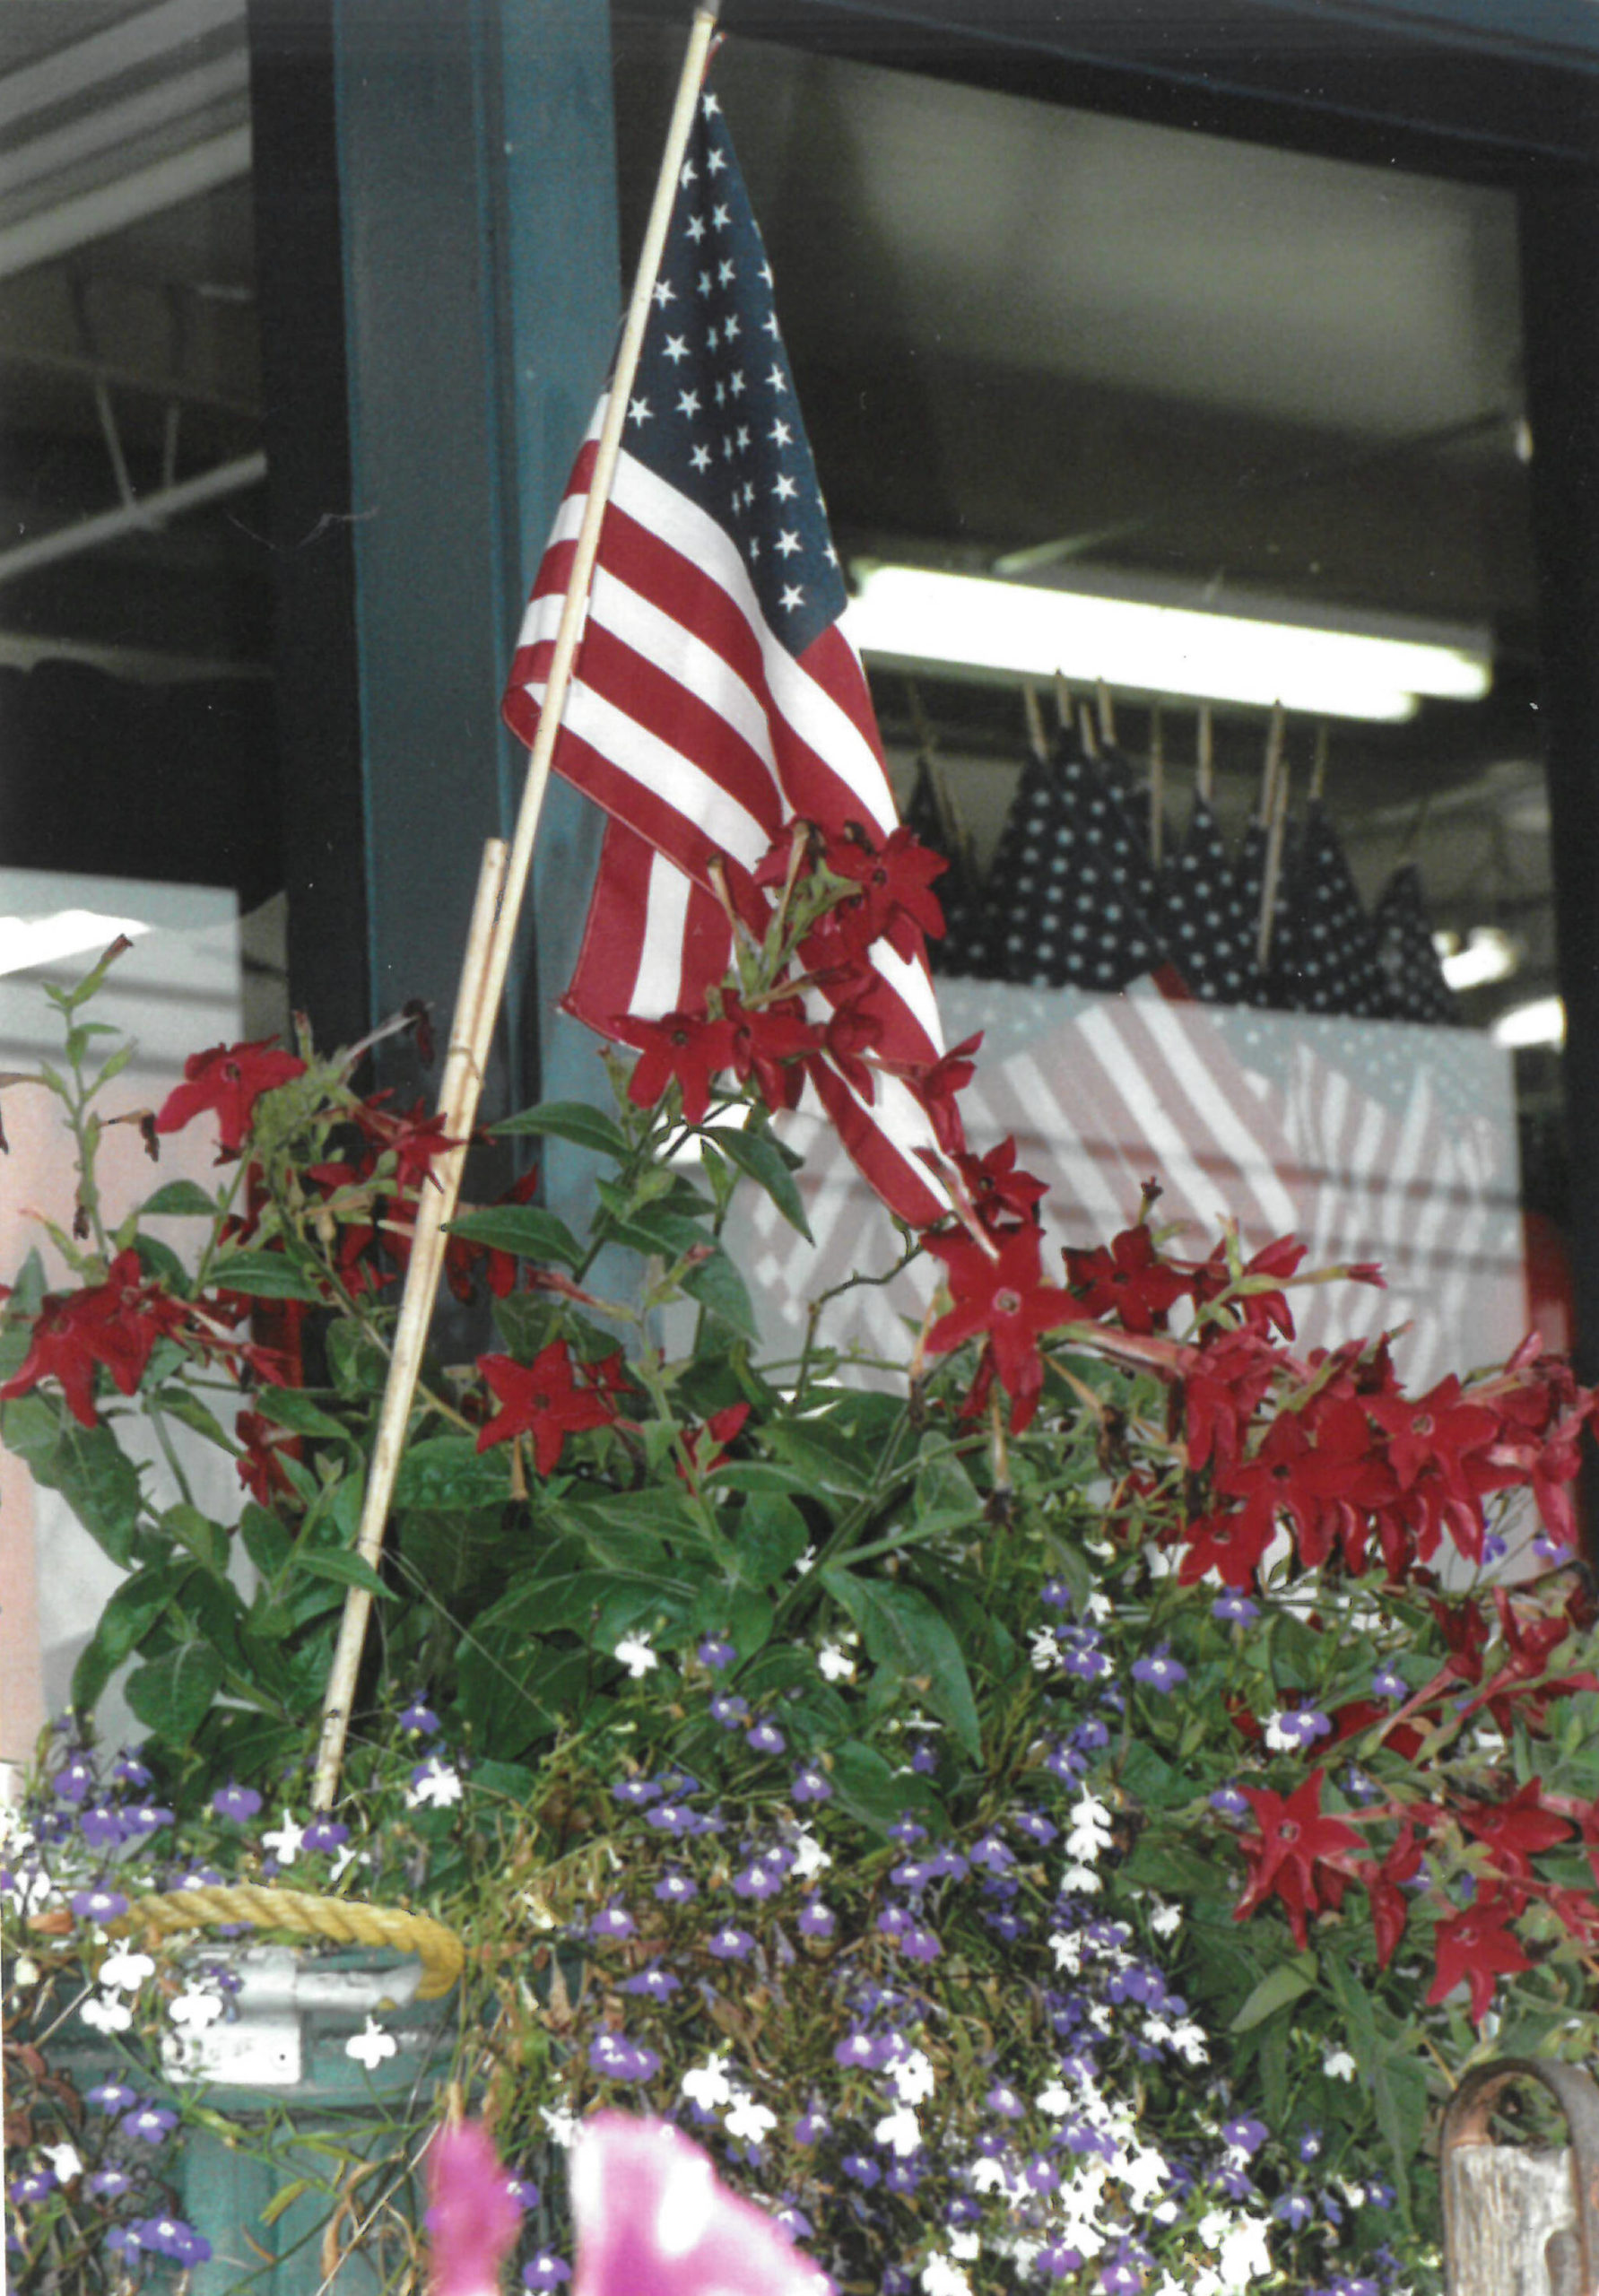 Twenty years ago after the attacks of Sept. 11, 2001, displays of U.S. flags were common, as seen here at NOMAR in Homer the week after the attacks. (Homer News file photo)